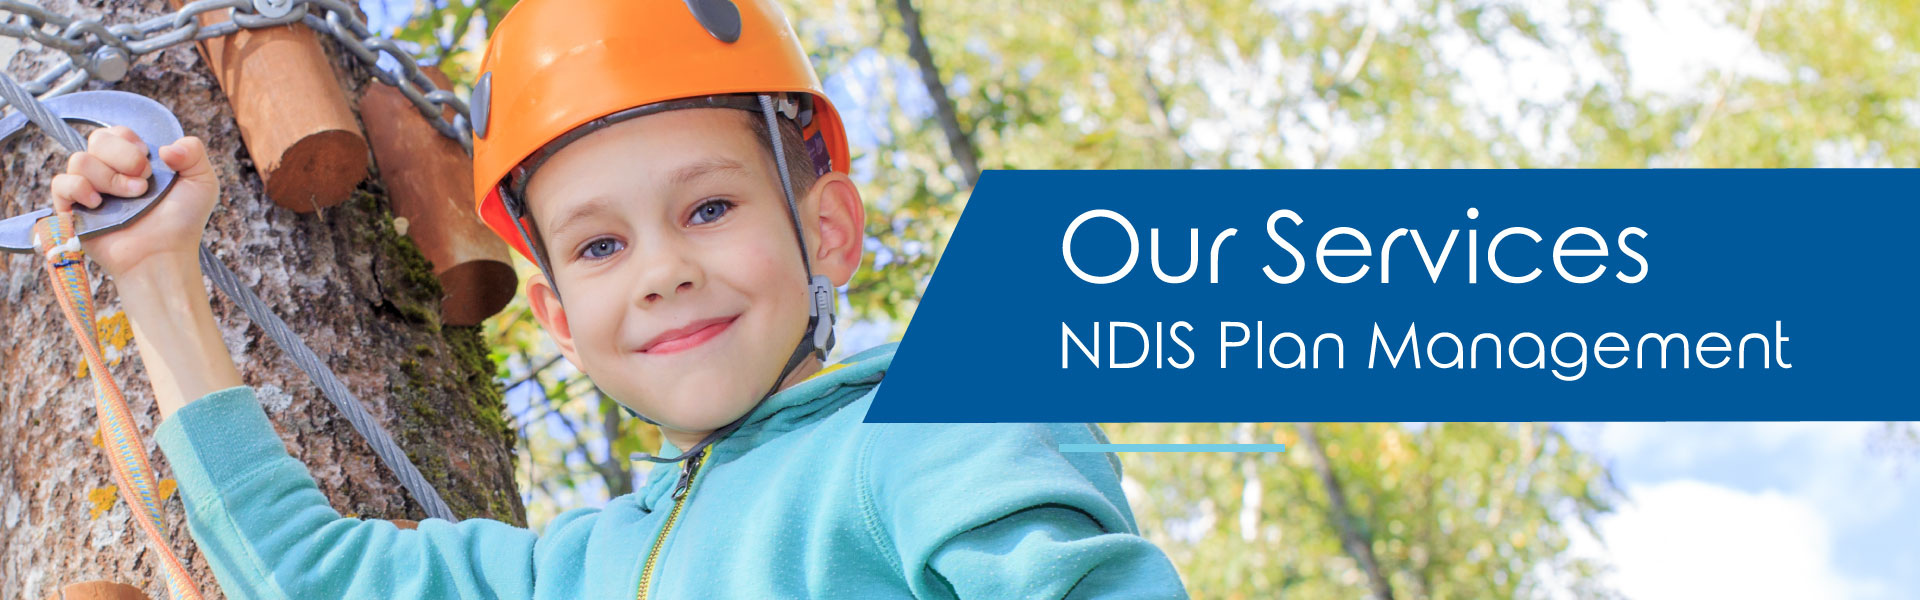 NDIS participant engaged in outdoors activites and climbing a tree, wearing safety gear.